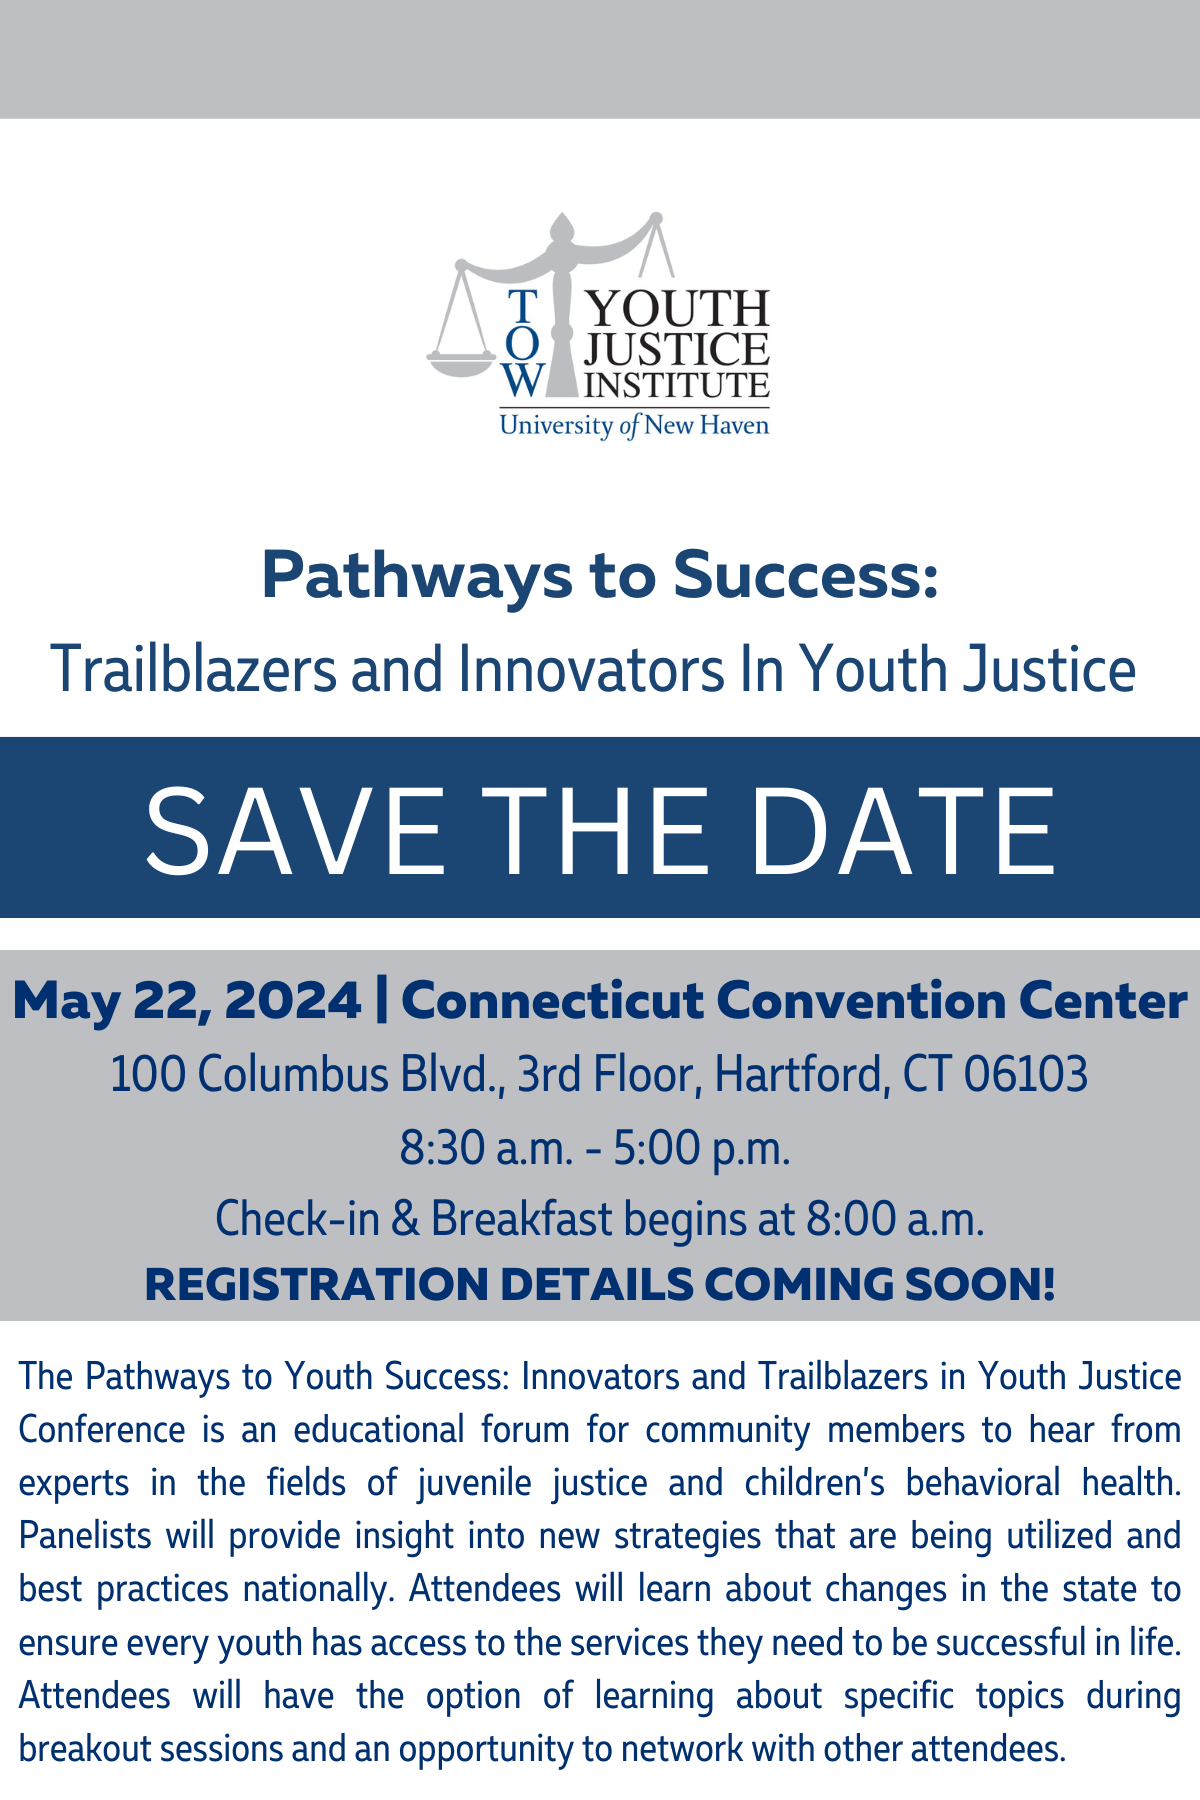 Save The Date: Annual Pathways to Success Conference